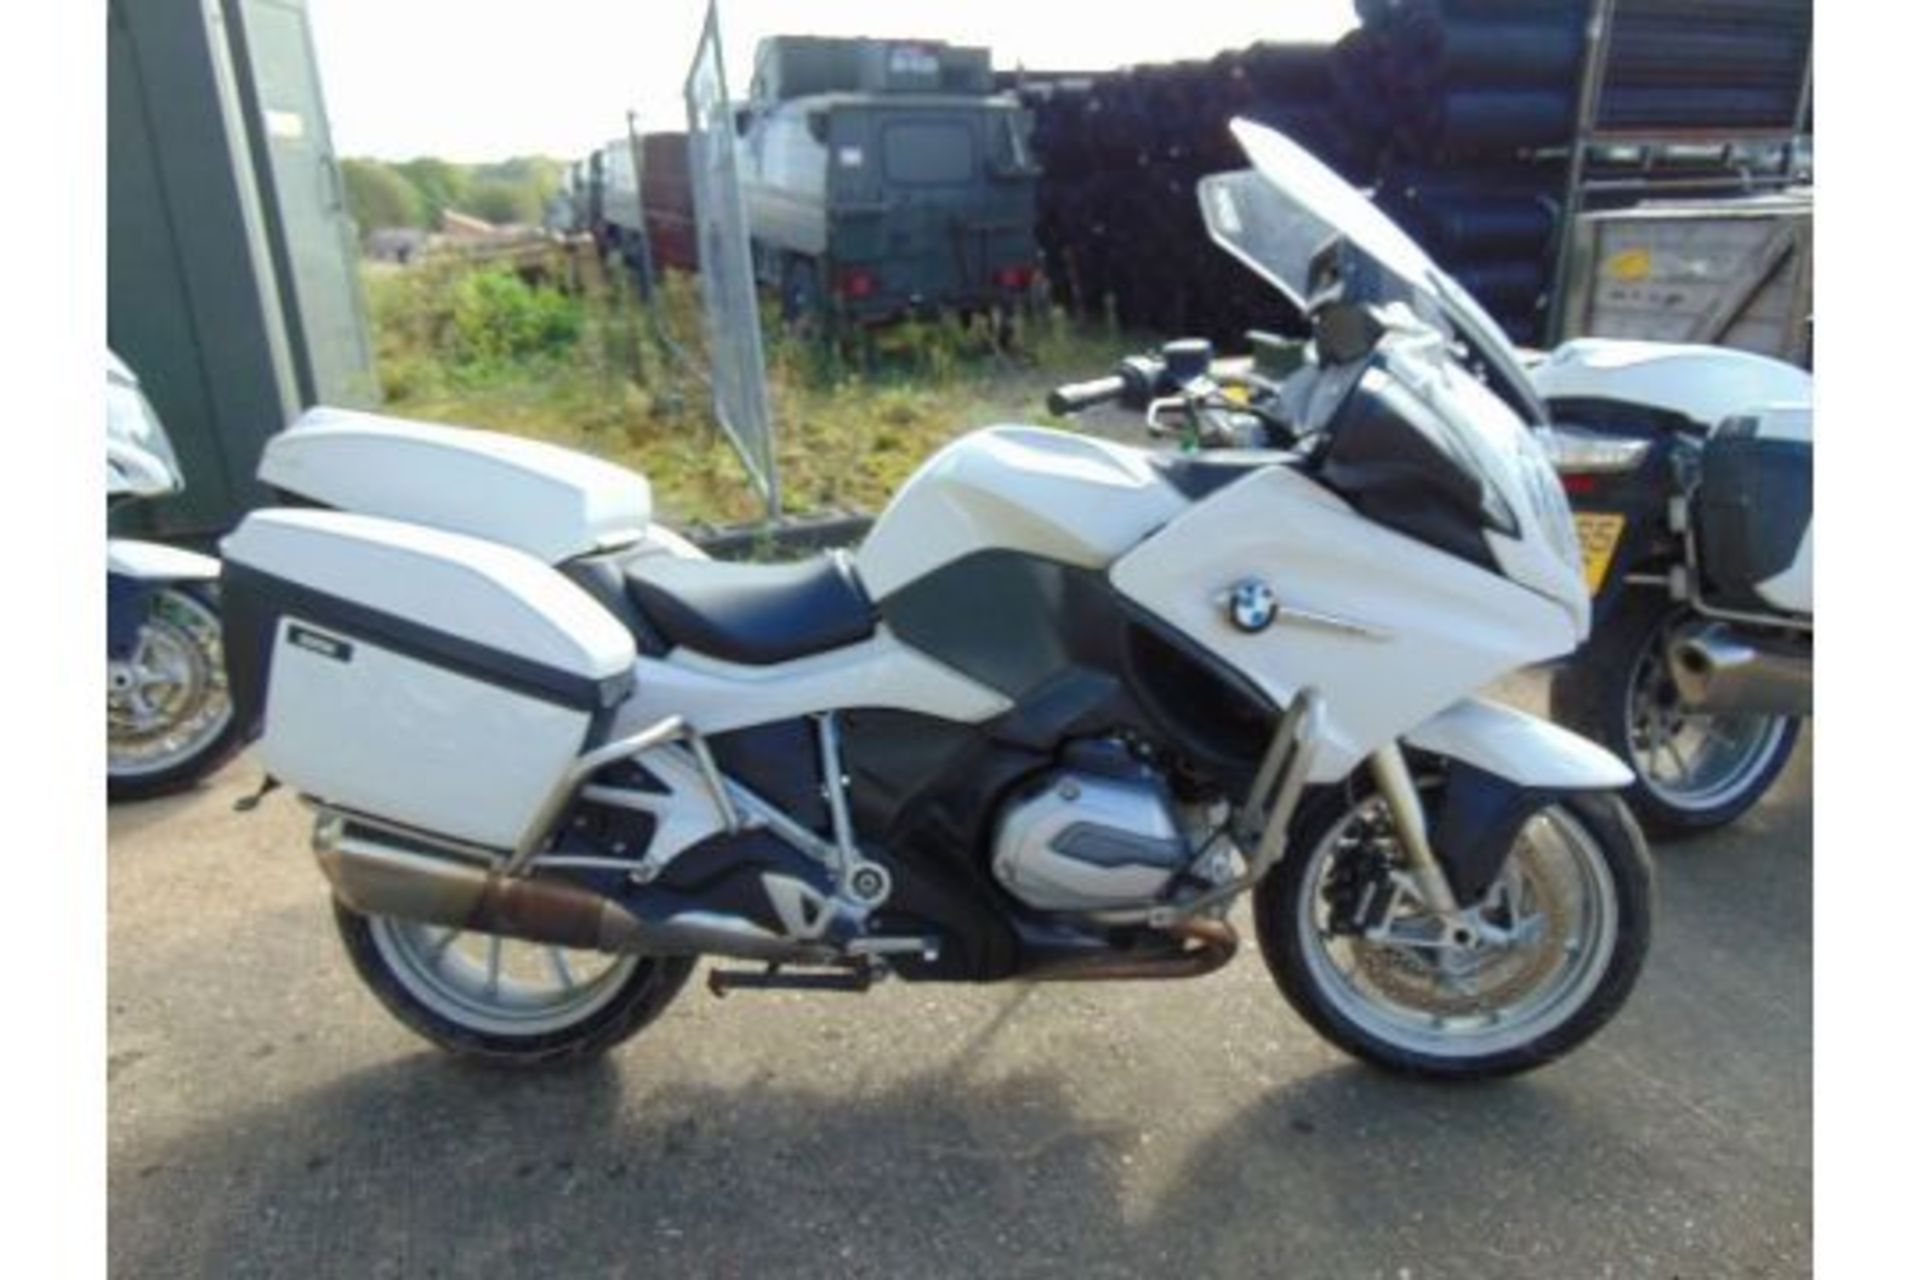 2015 BMW R1200RT Motorbike - Recent release from UK Police - Image 5 of 19